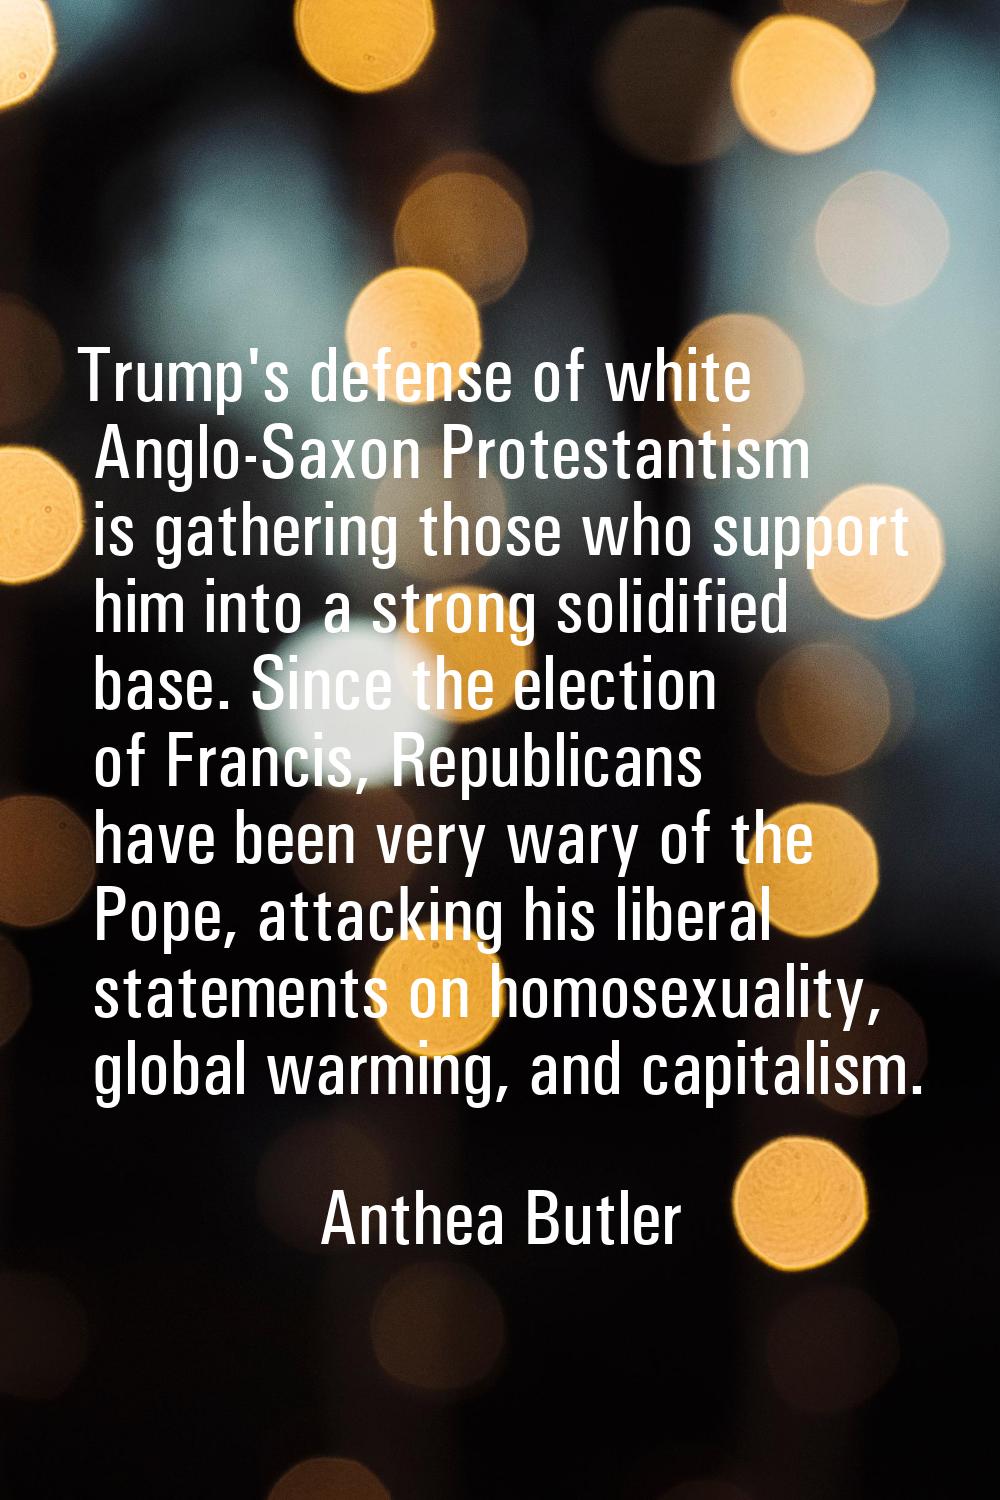 Trump's defense of white Anglo-Saxon Protestantism is gathering those who support him into a strong